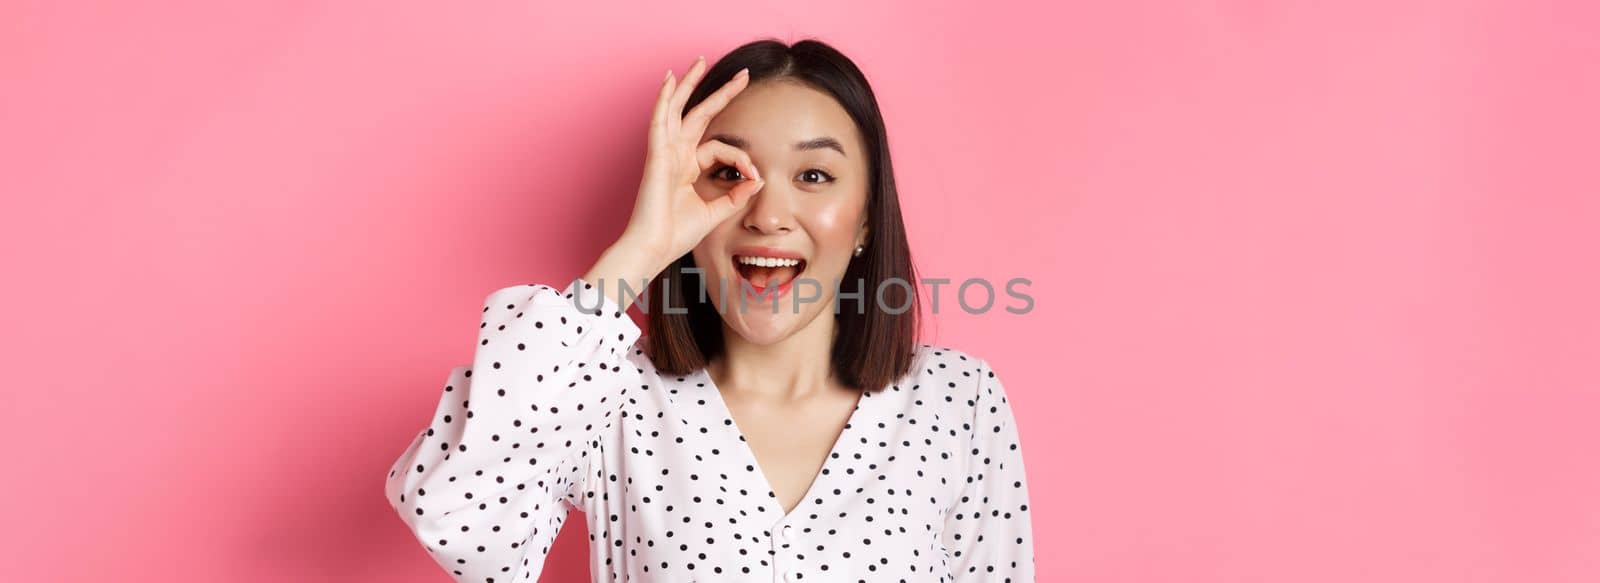 Beauty and lifestyle concept. Beautiful asian girl looking through okay sign and smiling amazed, standing against pink background.